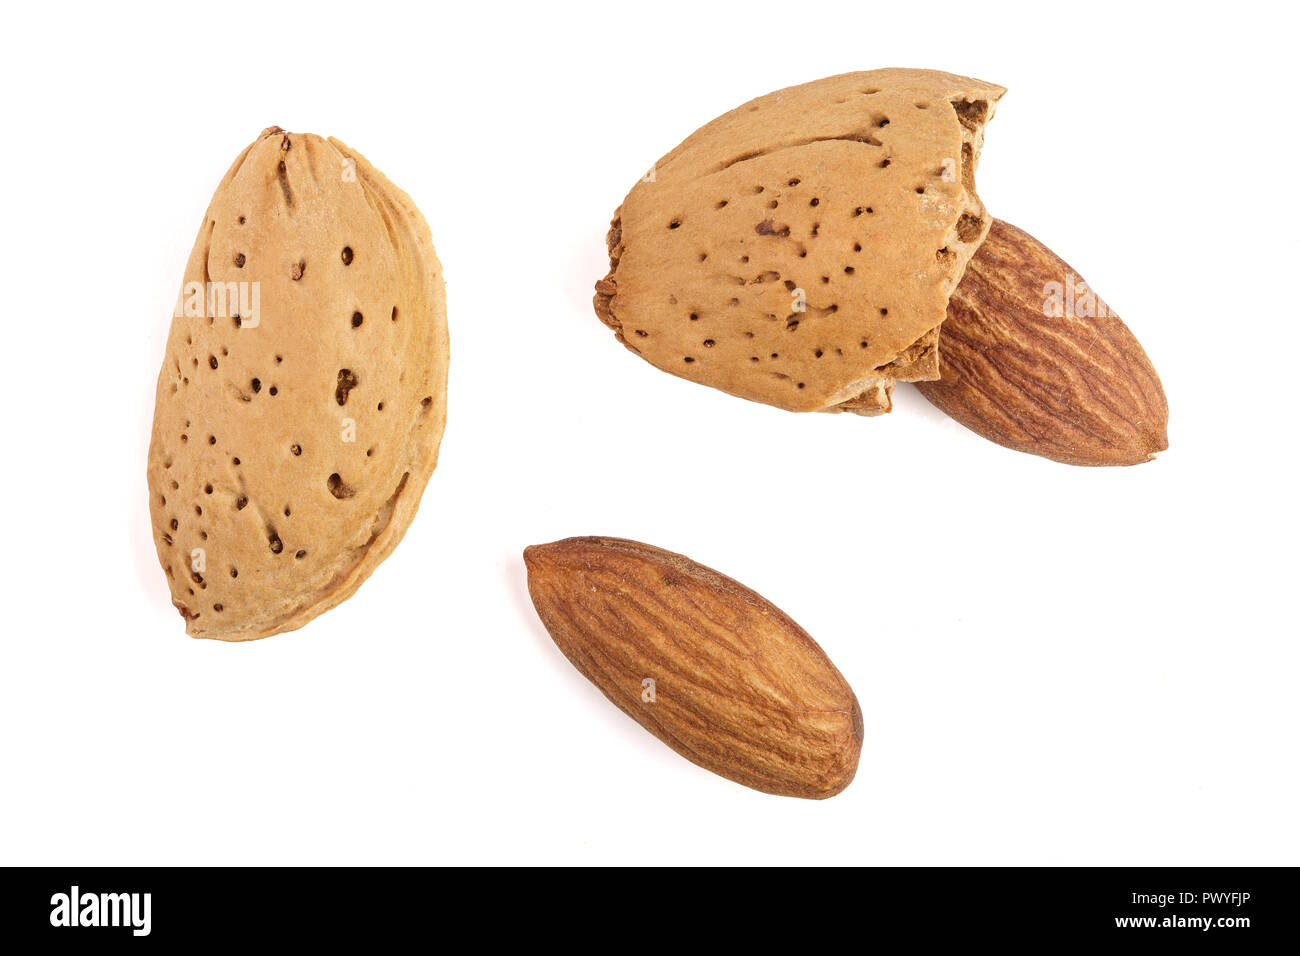 almonds are peeled and unpeeled isolated on white background without a shadow close up. Top view. Flat lay Stock Photo